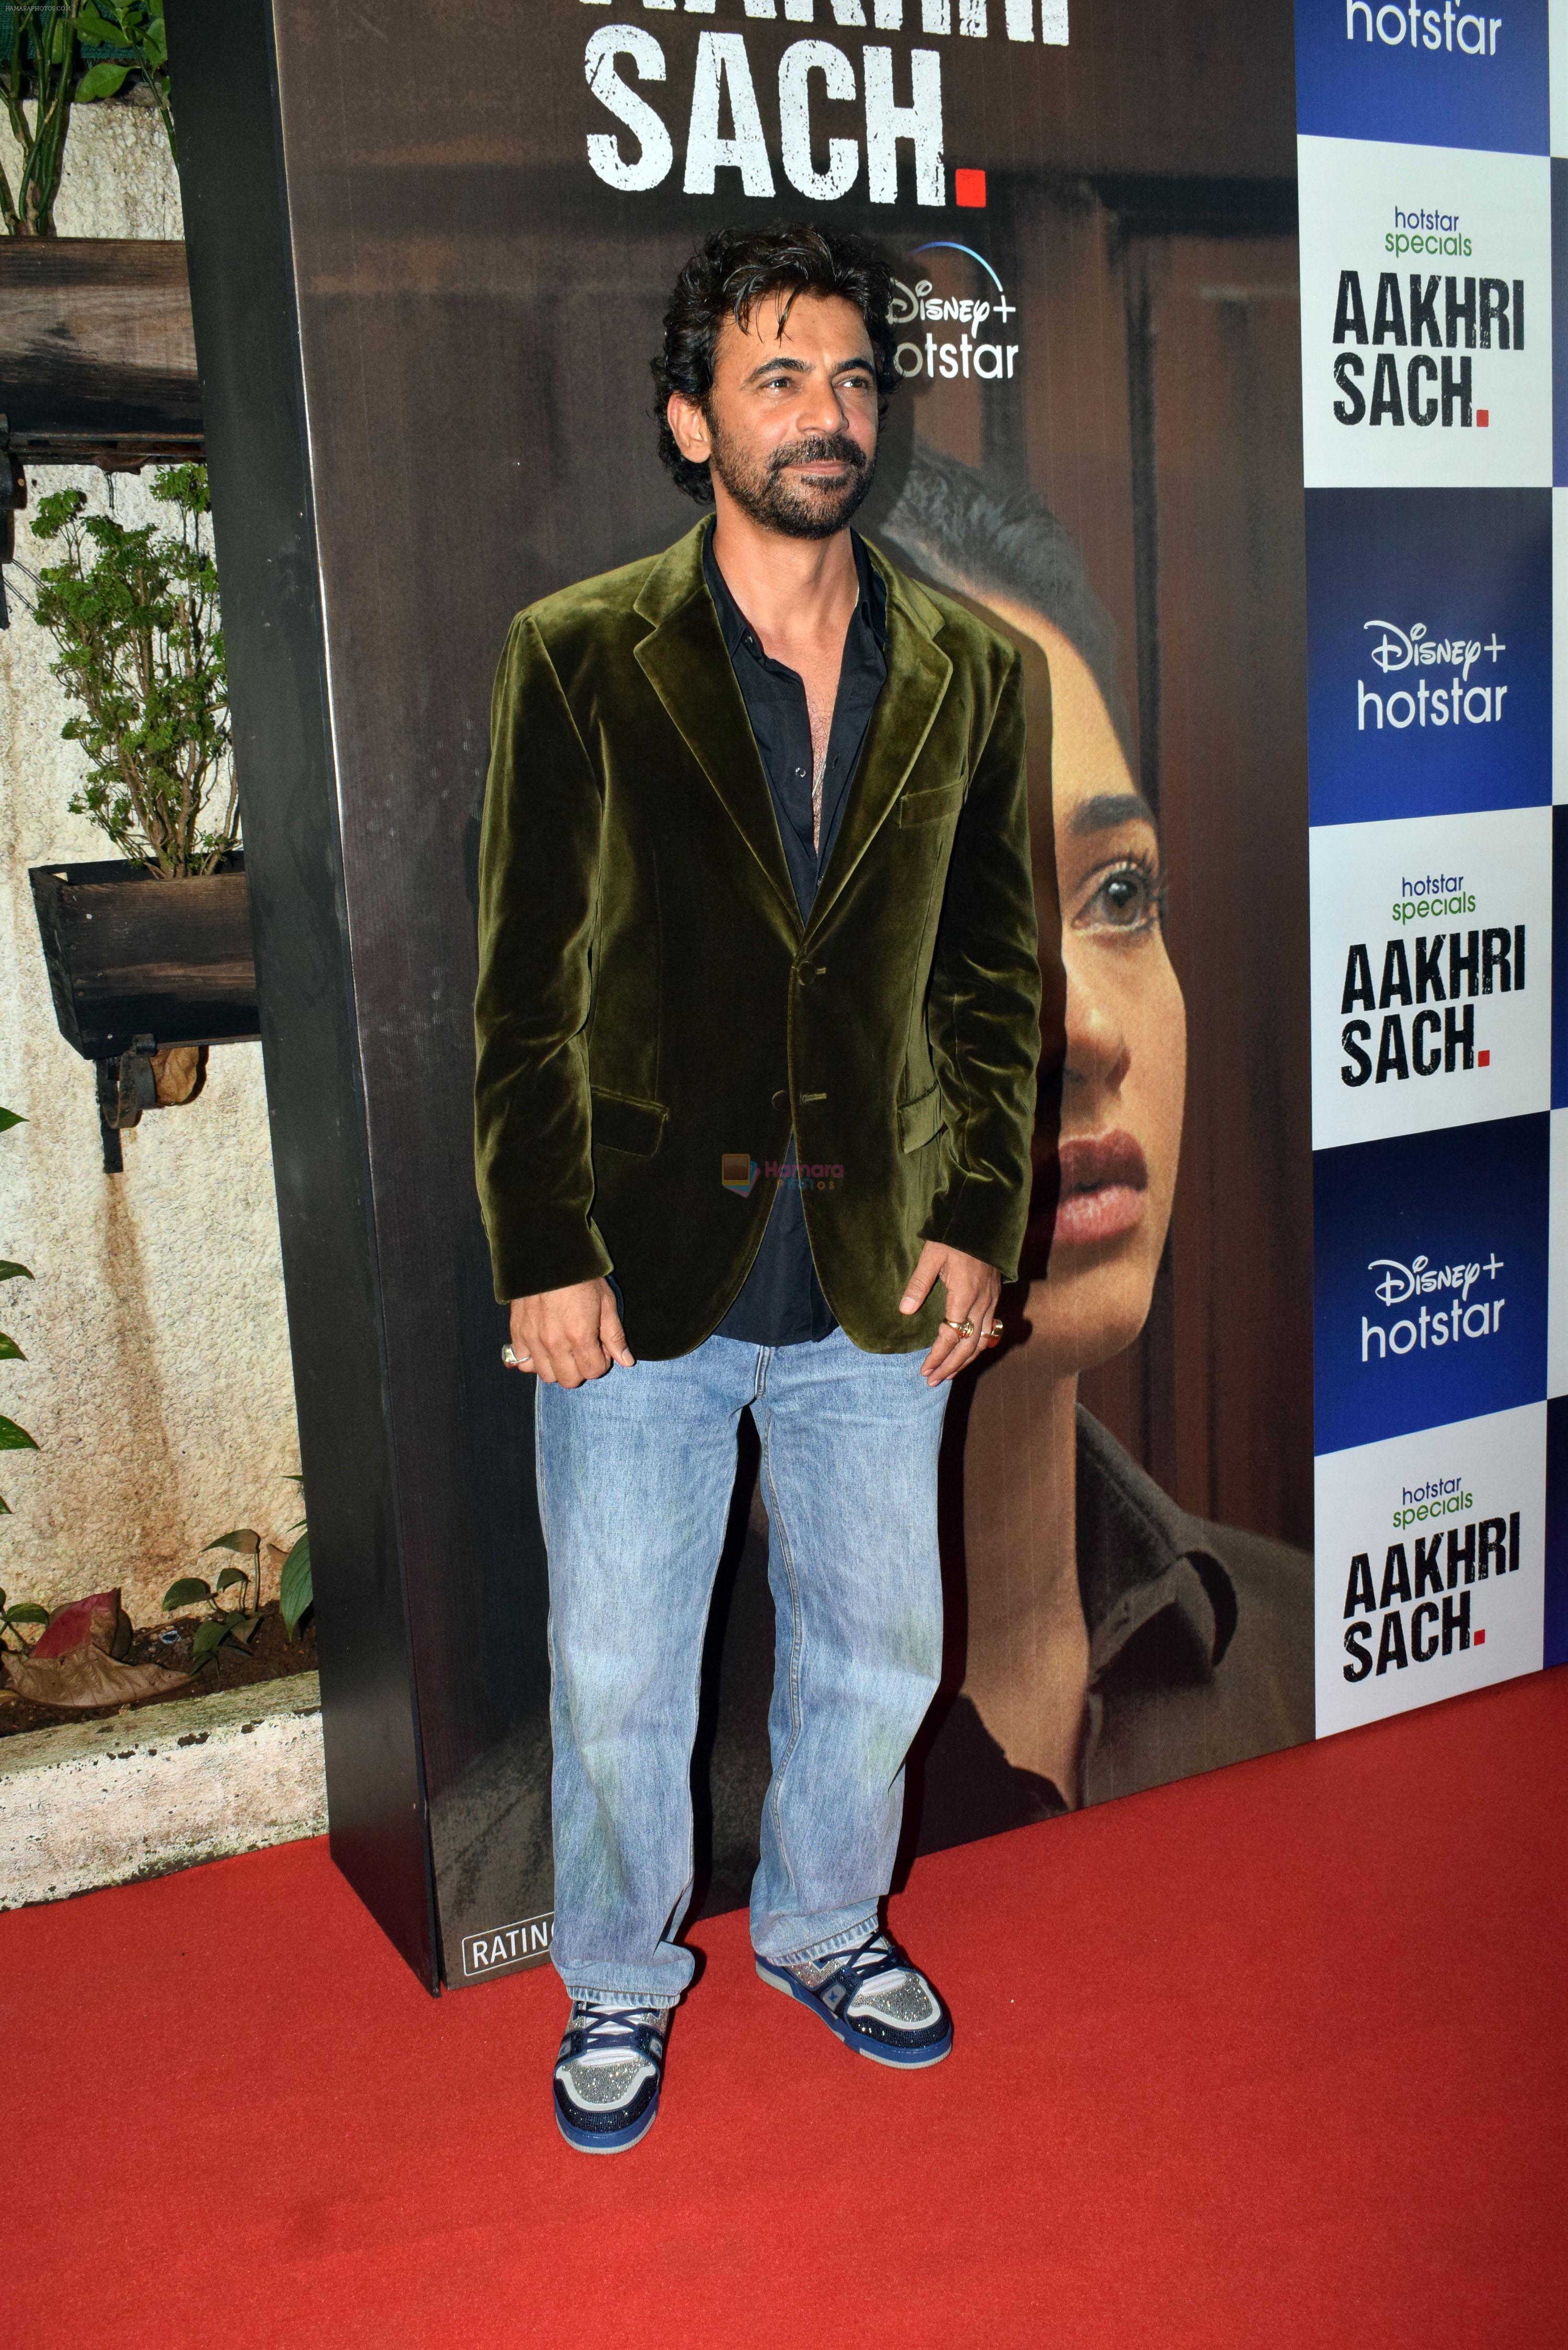 Sunil Grover at the premiere of Aakhri Sach series